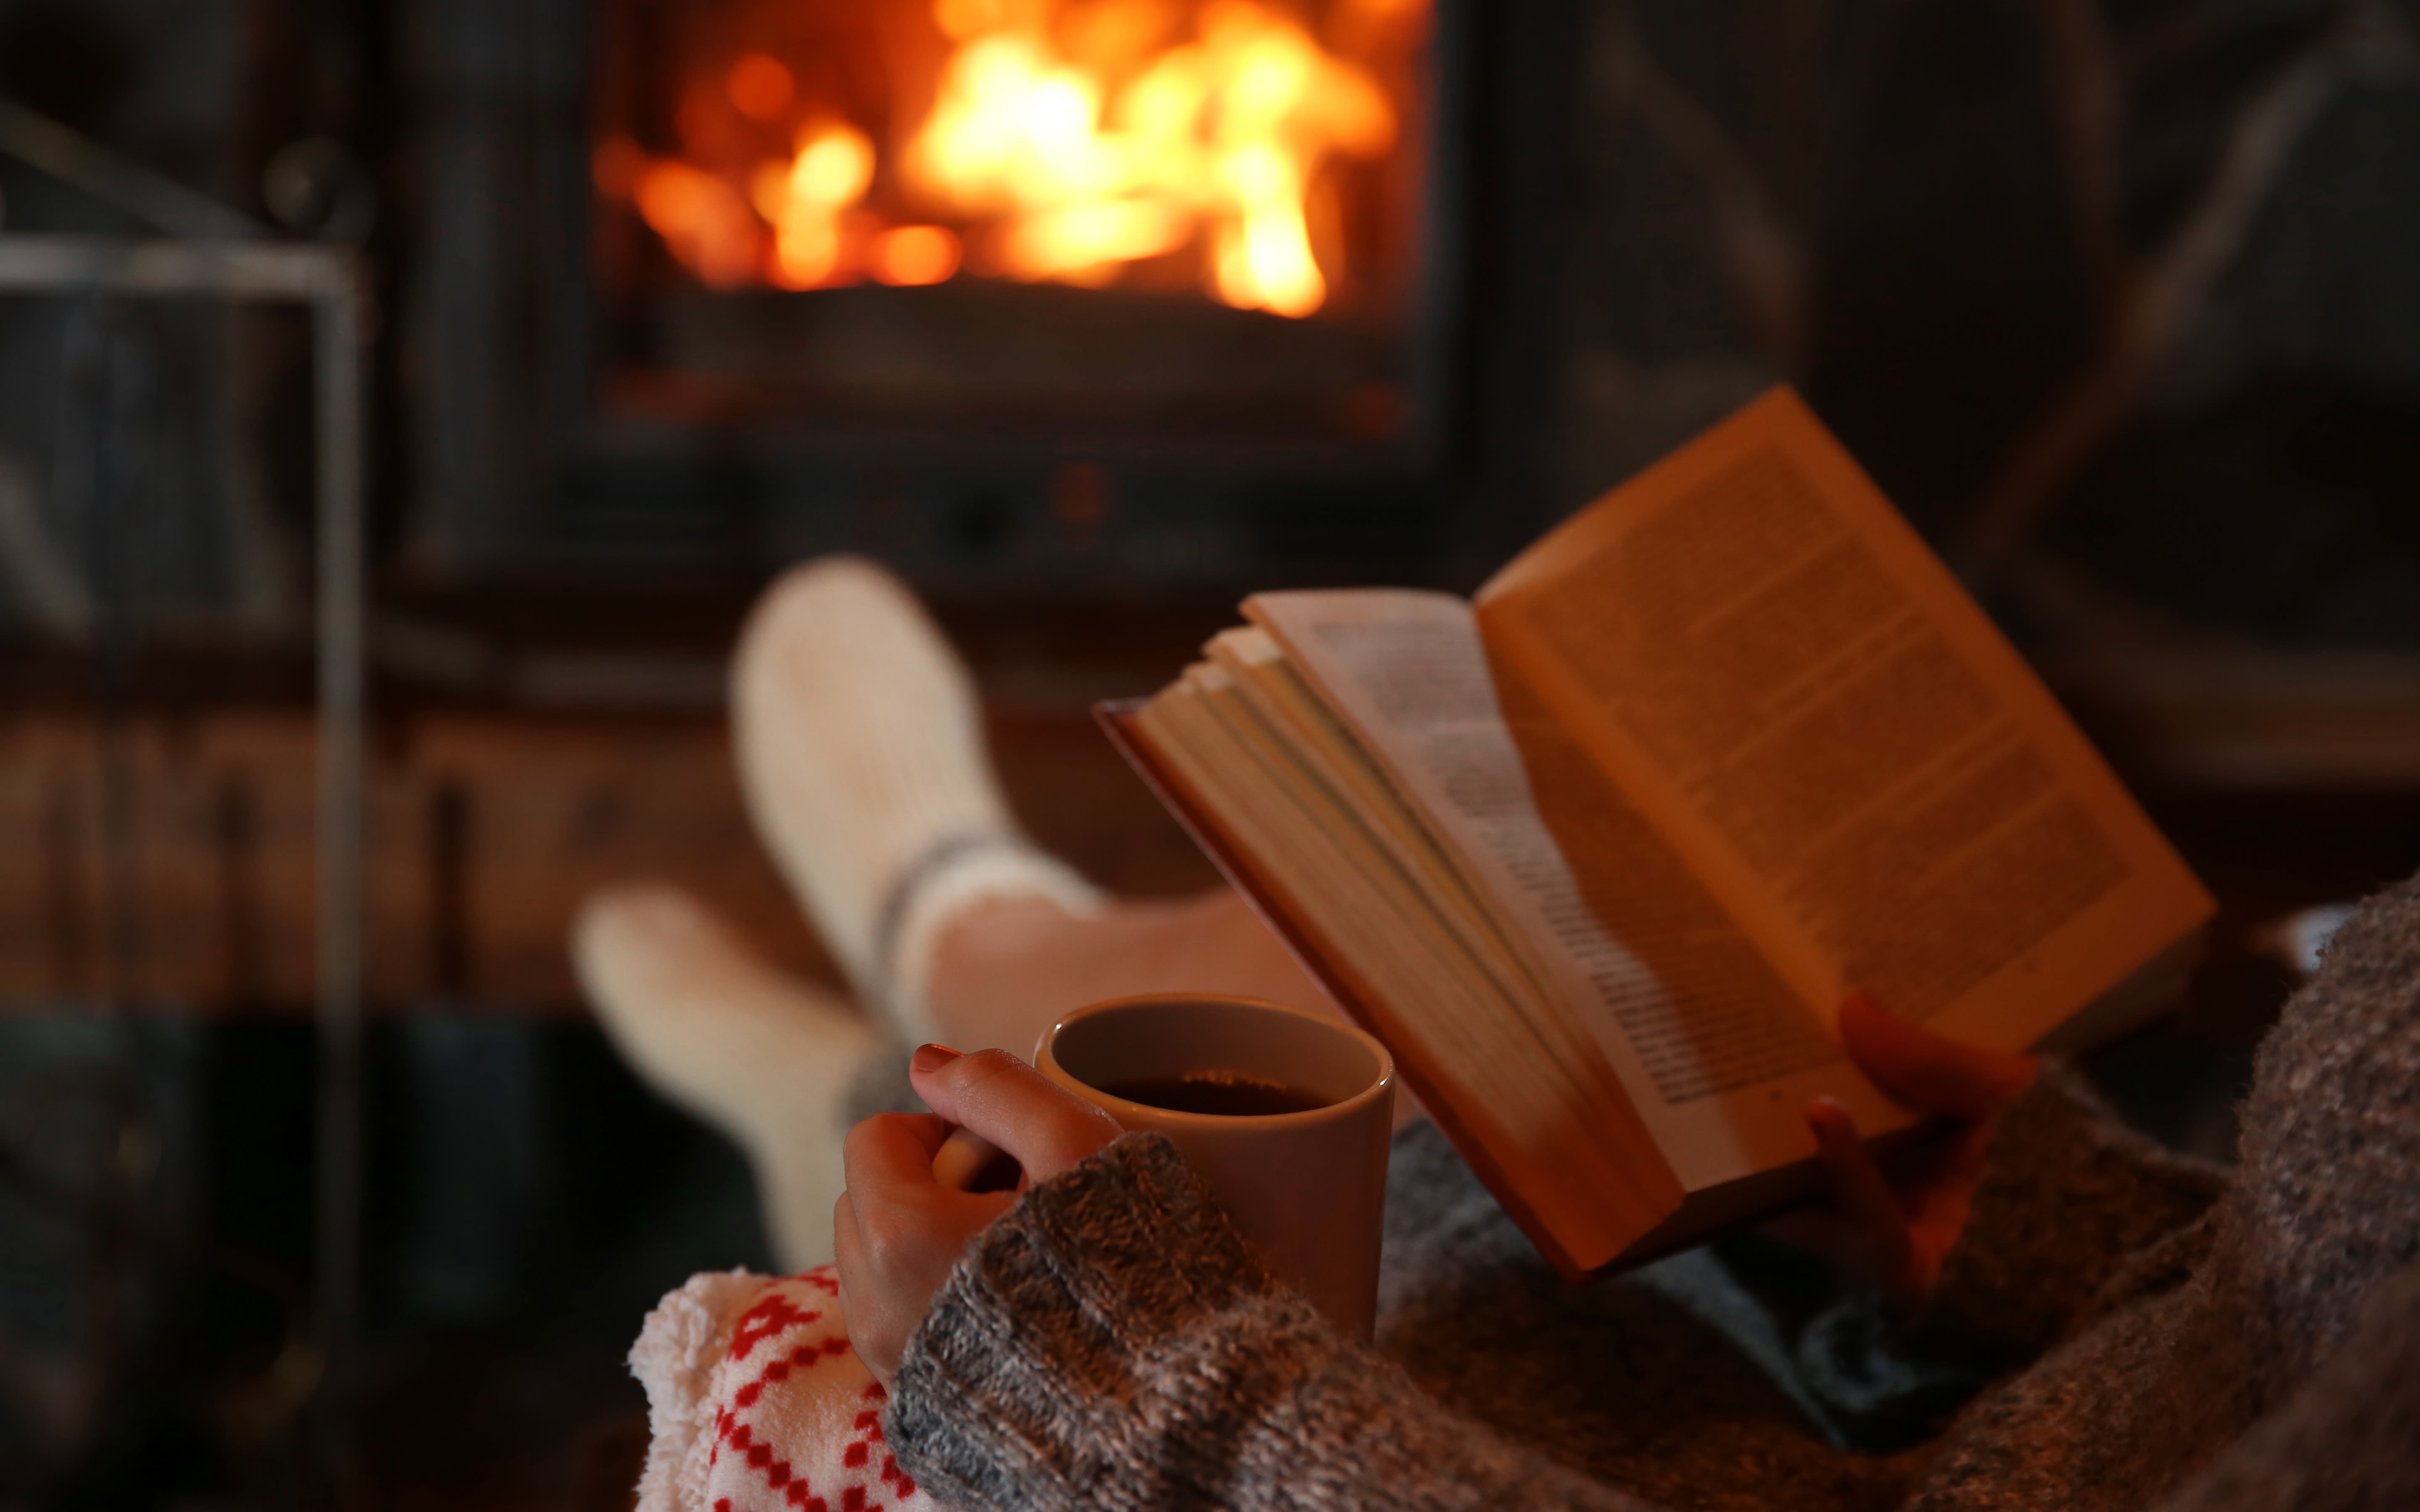 Woman enjoys book near a fire with a hot drink